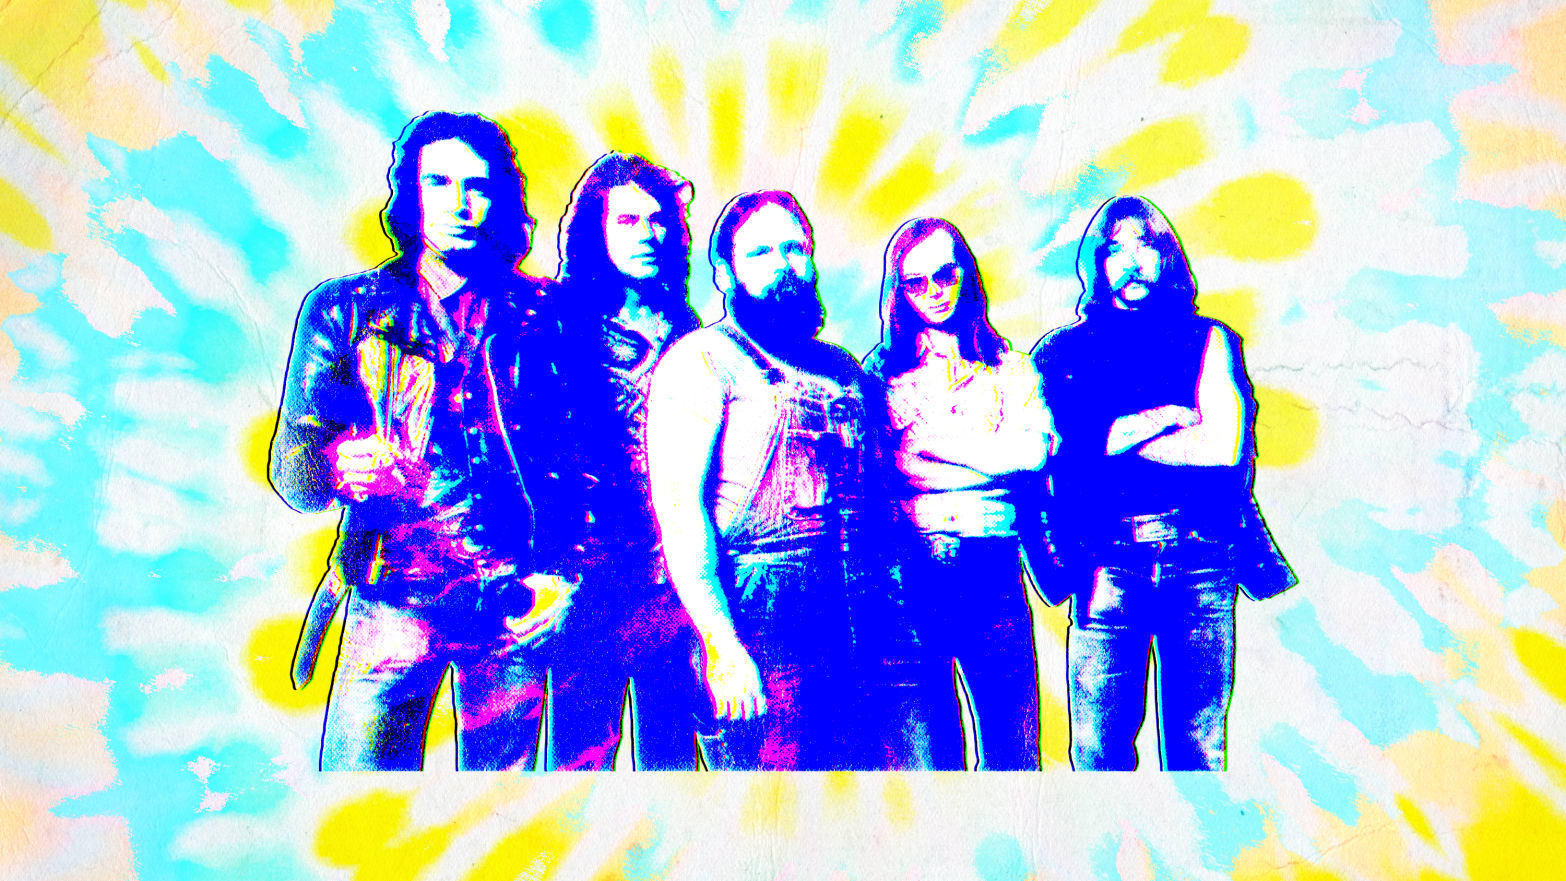 A photo illustration of the band Steely Dan on a tie dye background.